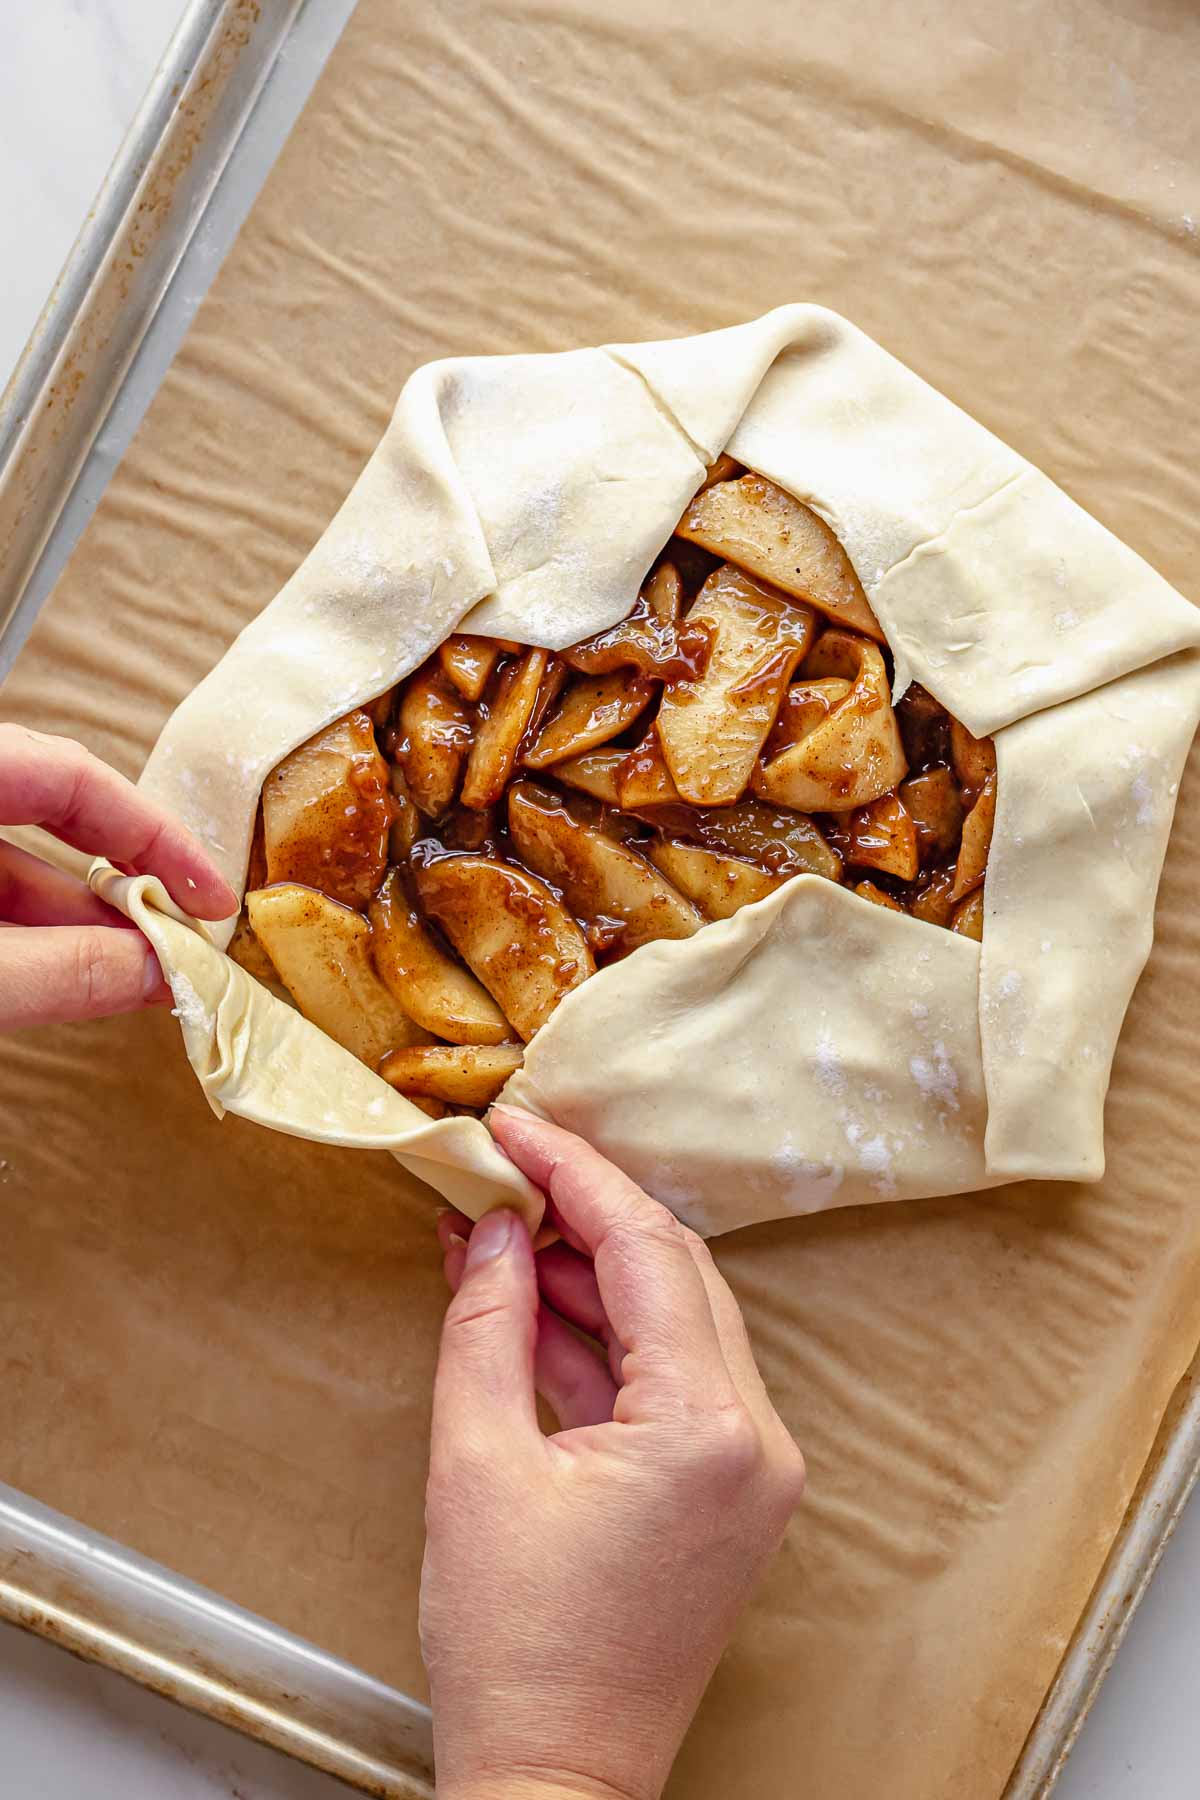 Hands fold the puff pastry upwards over the apples.